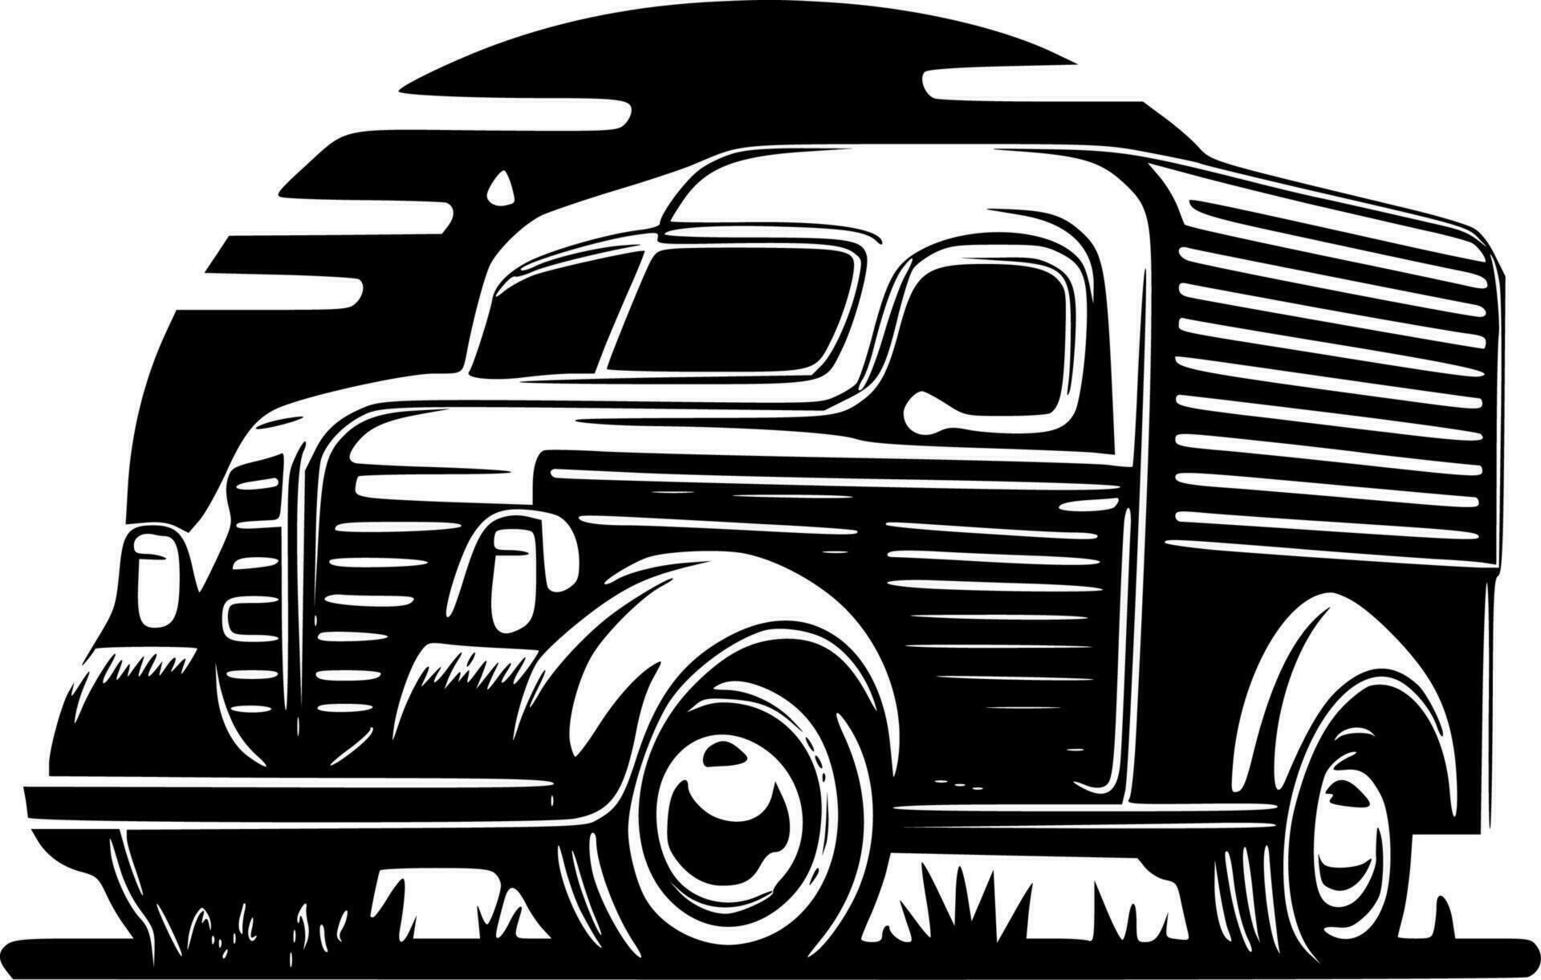 Vintage Truck - High Quality Vector Logo - Vector illustration ideal for T-shirt graphic